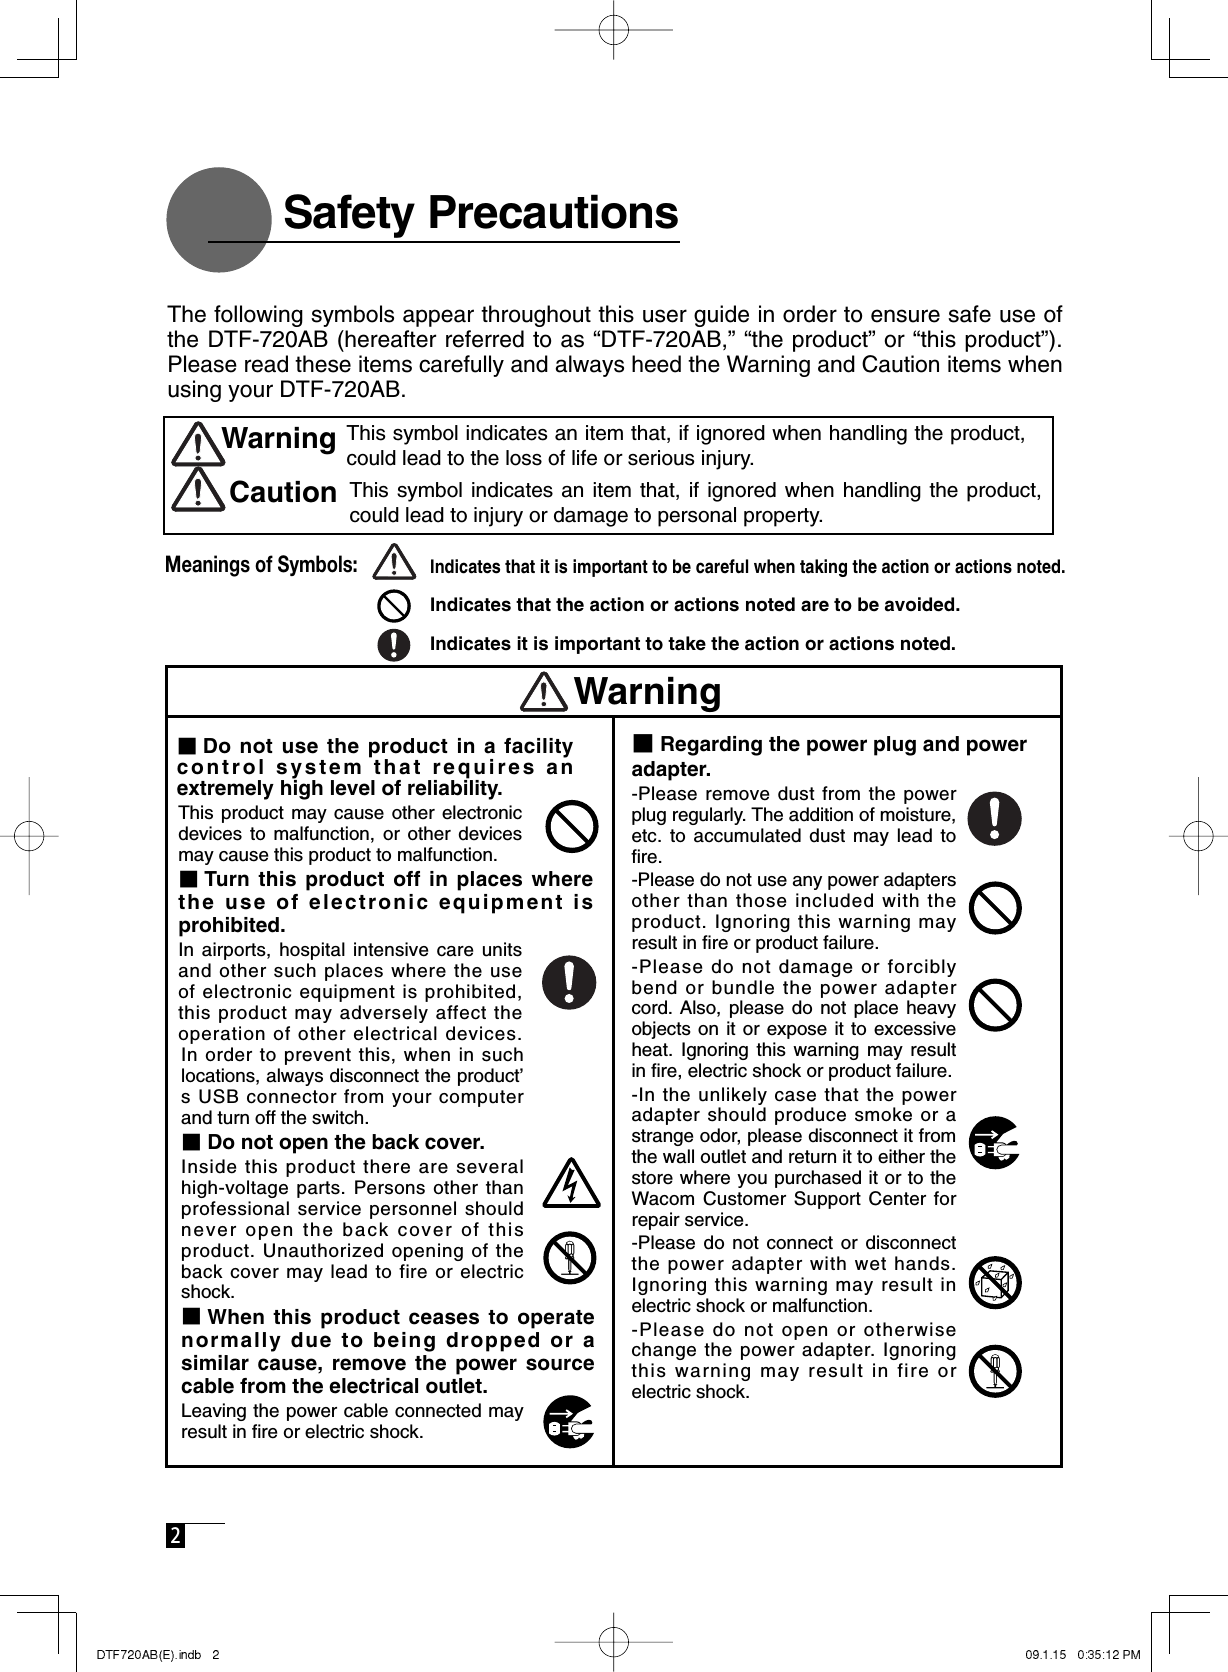  2    Safety Precautions■Regarding the power plug and power adapter. -Please remove dust from the power plug regularly. The addition of moisture, etc. to accumulated dust may lead to ﬁ re. -Please do not use any power adapters other than those included with the product. Ignoring this warning may result in ﬁ re or product failure. -Please do not damage or forcibly bend or bundle the power adapter cord. Also, please do not place heavy objects on it or expose it to excessive heat. Ignoring this warning may result in ﬁ re, electric shock or product failure.  -In the unlikely case that the power adapter should produce smoke or a strange odor, please disconnect it from the wall outlet and return it to either the store where you purchased it or to the Wacom Customer Support Center for repair service. -Please do not connect or disconnect the power adapter with wet hands. Ignoring this warning may result in electric shock or malfunction. -Please do not open or otherwise change the power adapter. Ignoring this warning may result in fire or electric shock.In order to prevent this, when in such locations, always disconnect the product’s USB connector from your computer and turn off the switch. ■Do not open the back cover. Inside this product there are several high-voltage parts. Persons other than professional service personnel should never open the back cover of this product. Unauthorized opening of the back cover may lead to fire or electric shock. ■When this product ceases to operate normally due to being dropped or a similar cause, remove the power source cable from the electrical outlet. Leaving the power cable connected may result in ﬁ re or electric shock.  This product may cause other electronic devices to malfunction, or other devices may cause this product to malfunction.■Turn this product off in places where the use of electronic equipment is prohibited. In airports, hospital intensive care units and other such places where the use of electronic equipment is prohibited, this product may adversely affect the operation of other electrical devices. The following symbols appear throughout this user guide in order to ensure safe use of the DTF-720AB (hereafter referred to as “DTF-720AB,” “the product” or “this product”). Please read these items carefully and always heed the Warning and Caution items when using your DTF-720AB.This symbol indicates an item that, if ignored when handling the product, could lead to the loss of life or serious injury.WarningThis symbol indicates an item that, if ignored when handling the product, could lead to injury or damage to personal property. CautionMeanings of Symbols:Indicates that it is important to be careful when taking the action or actions noted.Indicates that the action or actions noted are to be avoided.Indicates it is important to take the action or actions noted.Warning■Do not use the product in a facility control system that requires an extremely high level of reliability. 